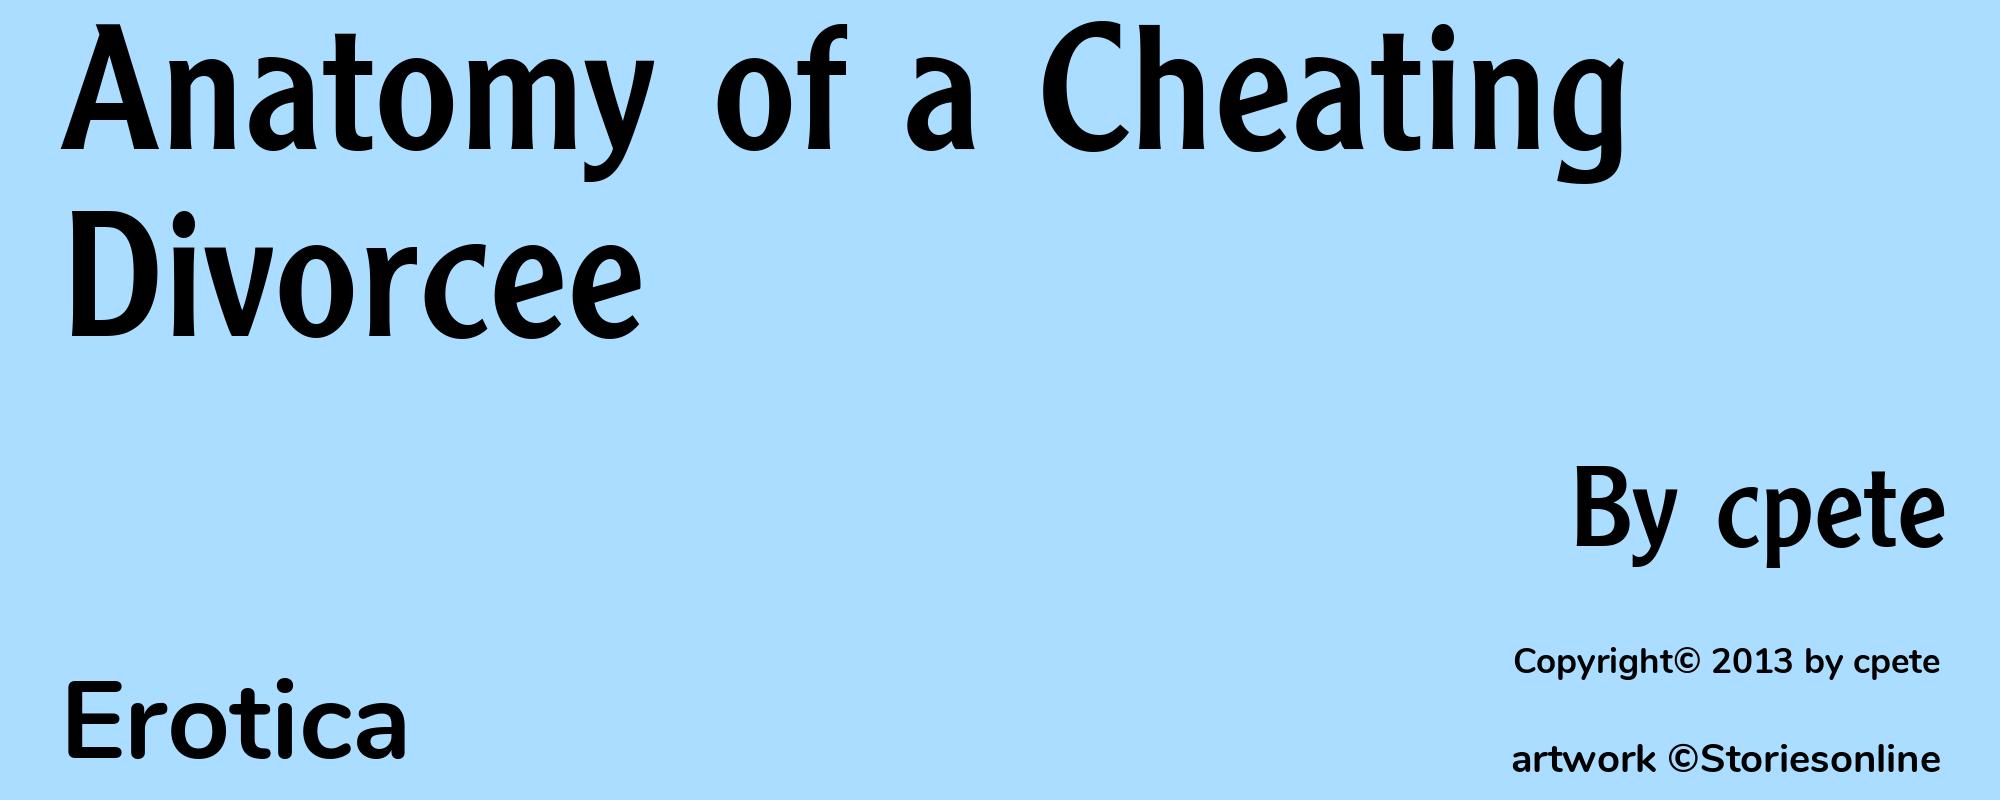 Anatomy of a Cheating Divorcee - Cover